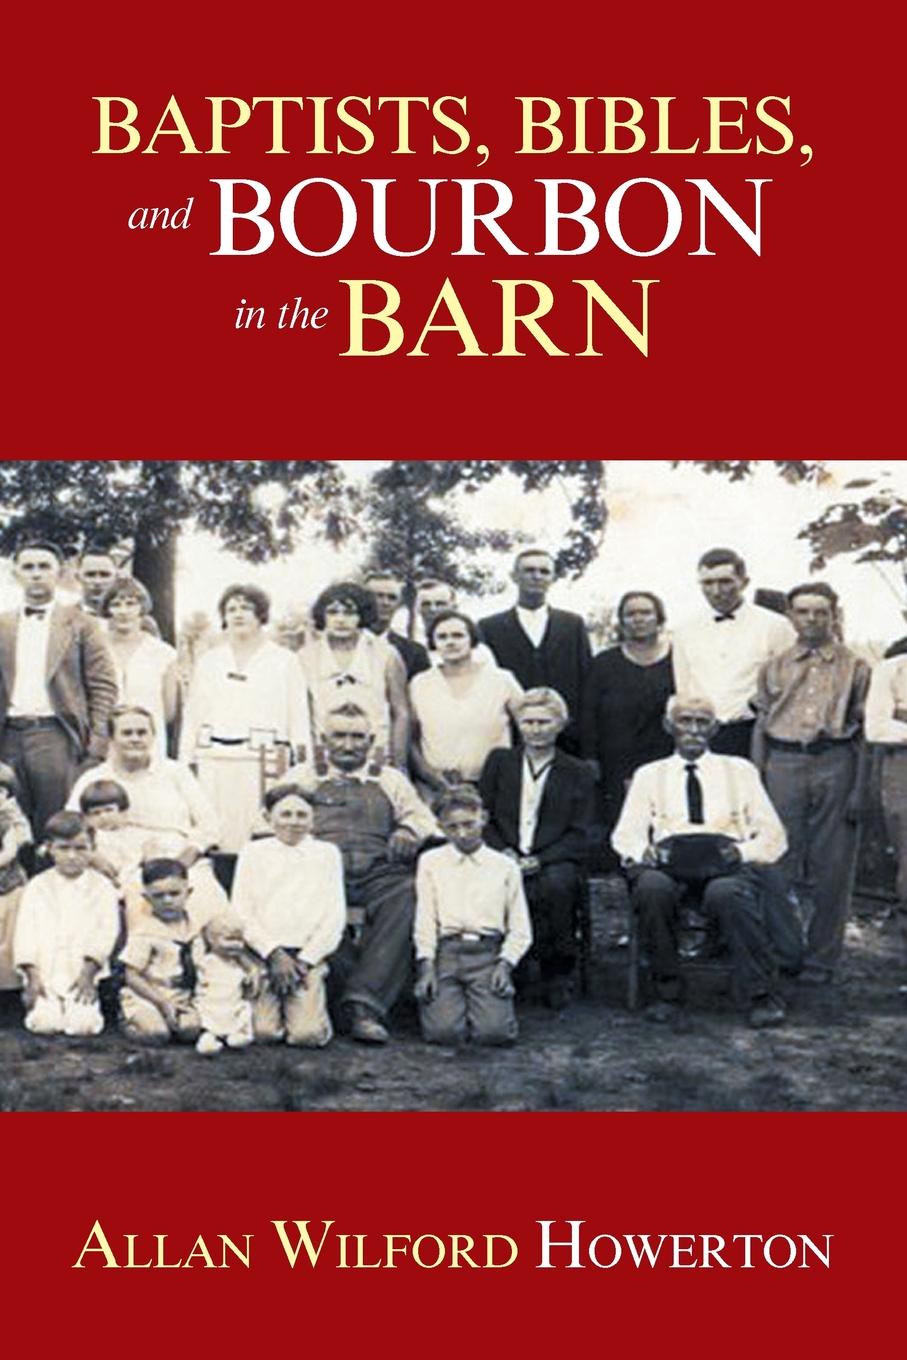 Baptists, Bibles, and Bourbon in the Barn. The Stories, the Characters, and the Haunting Places of a West (O`Mg) Kentucky Childhood.